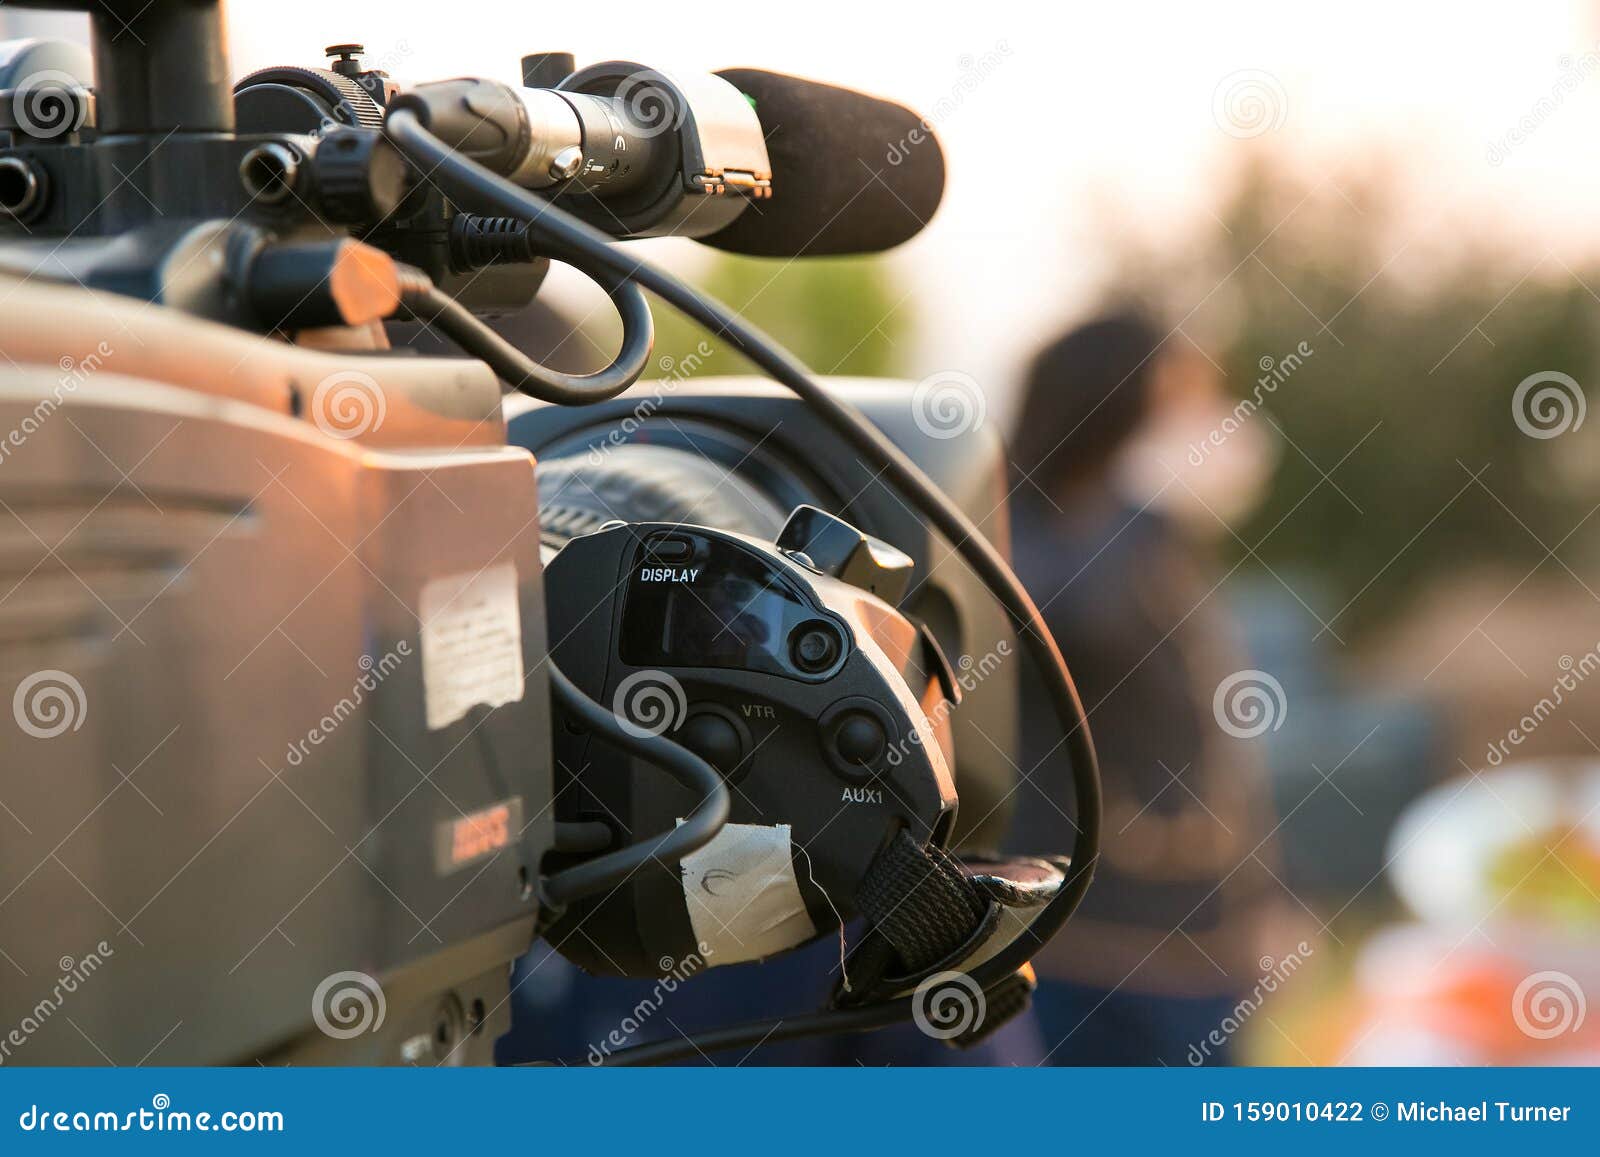 tv camera and presenter host on a live news broadcast on location